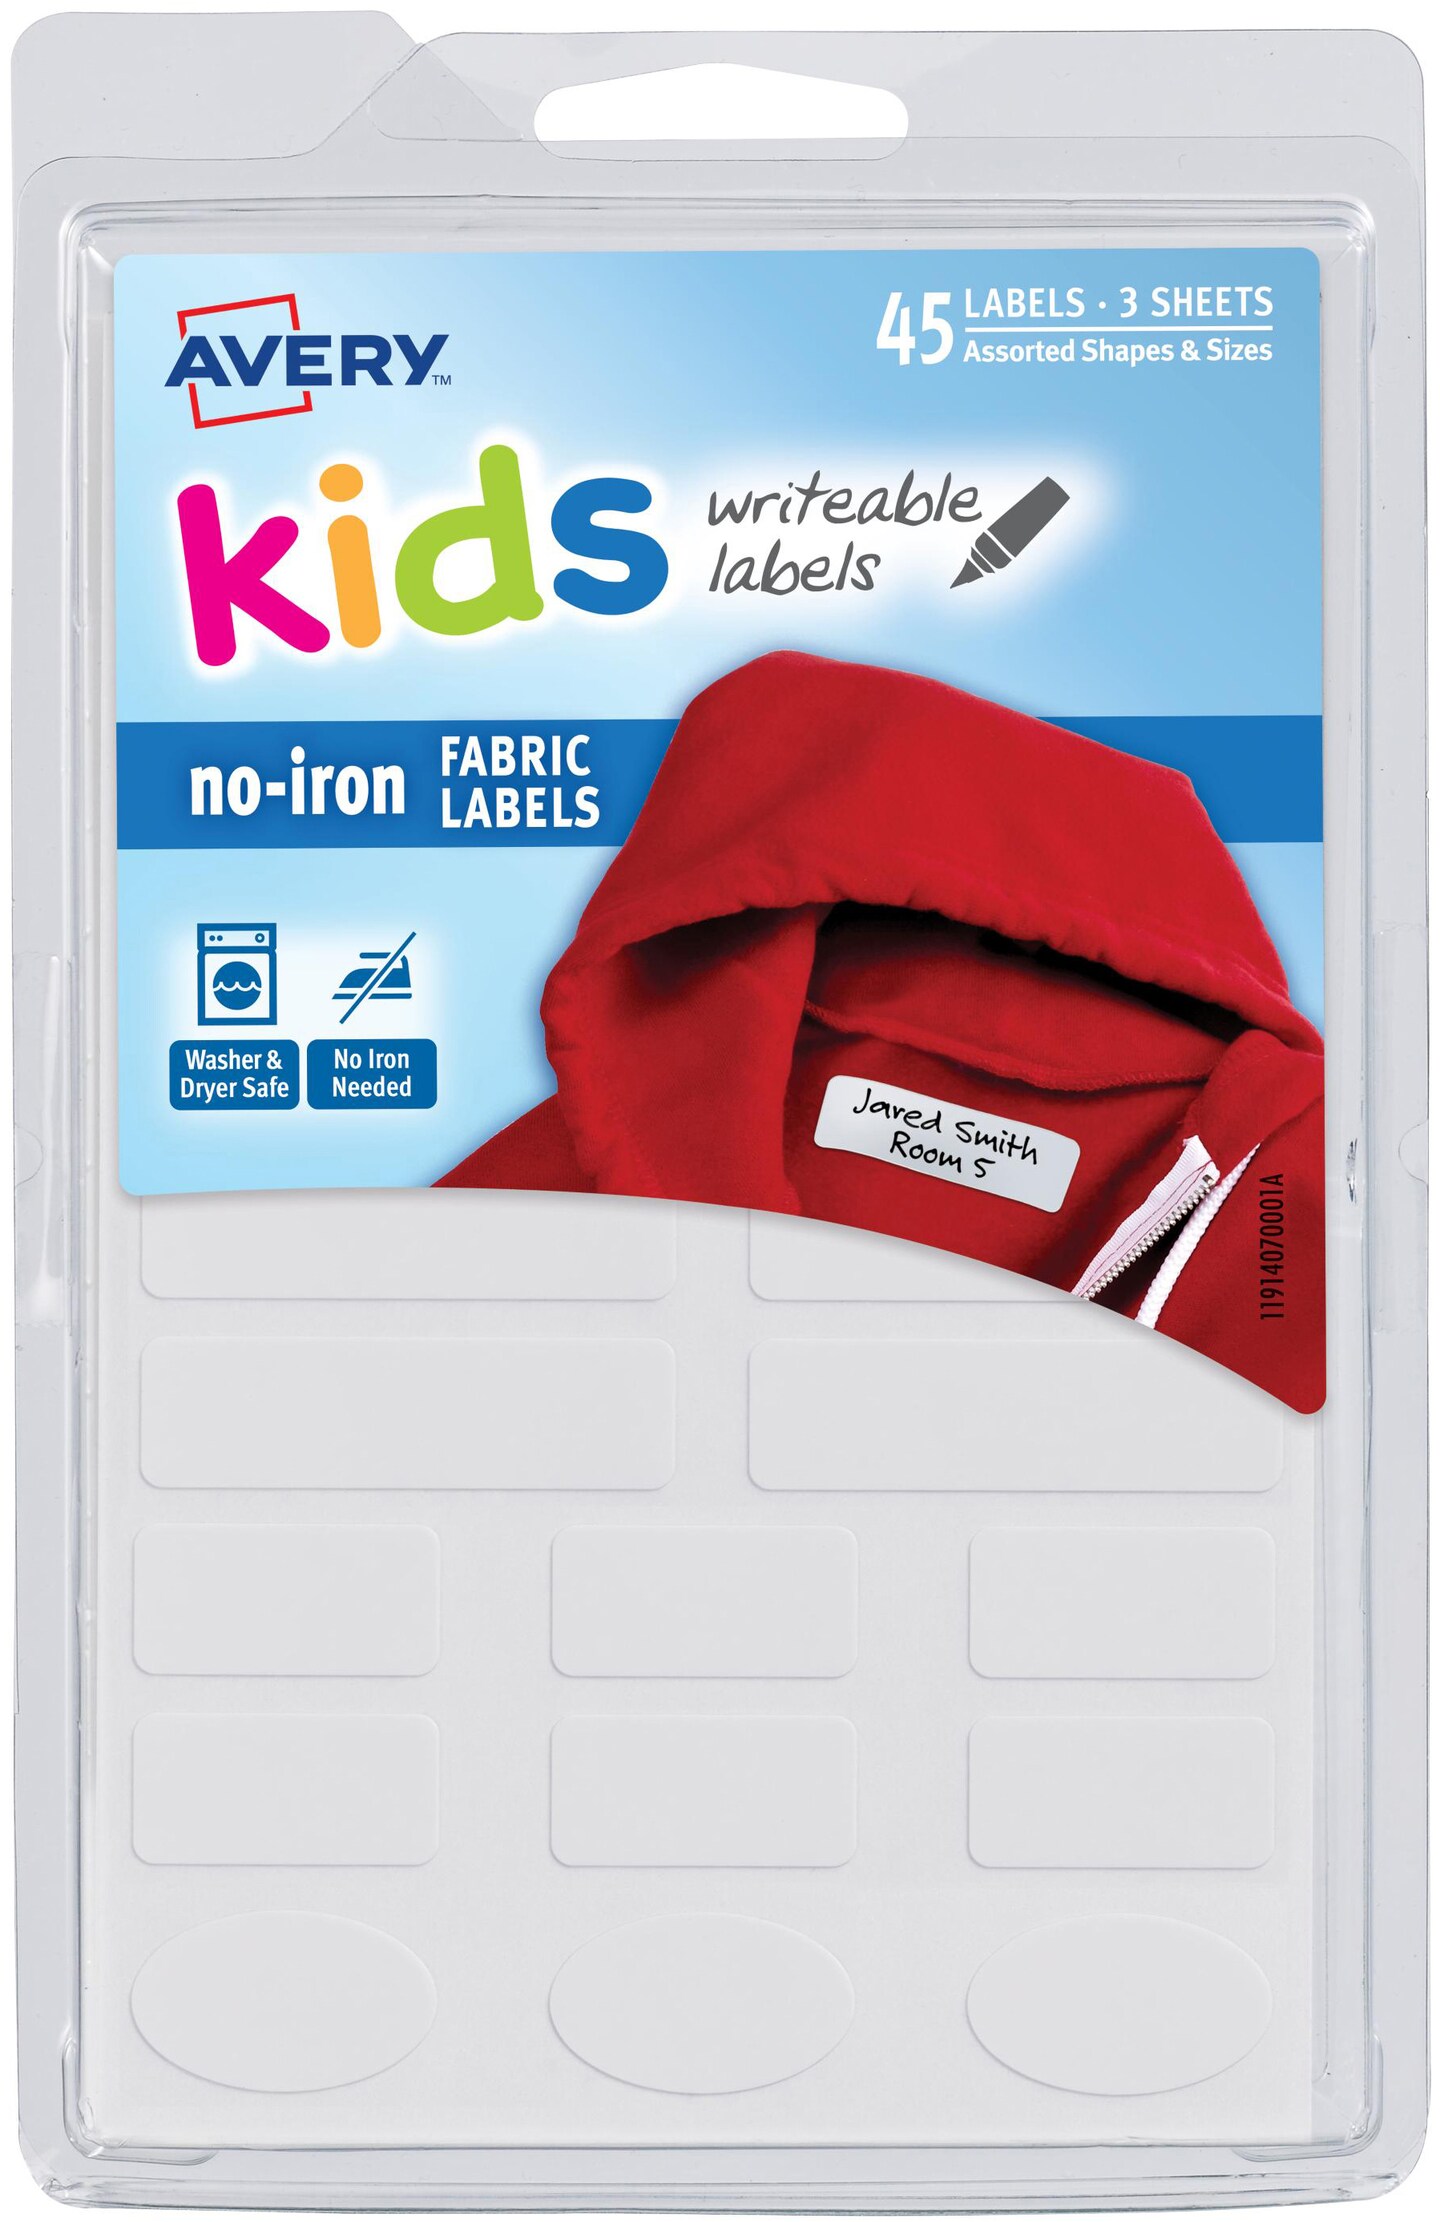 Avery Kids Writeable Labels No-Iron Fabric Labels 45/Pkg-White, Assorted  Sizes